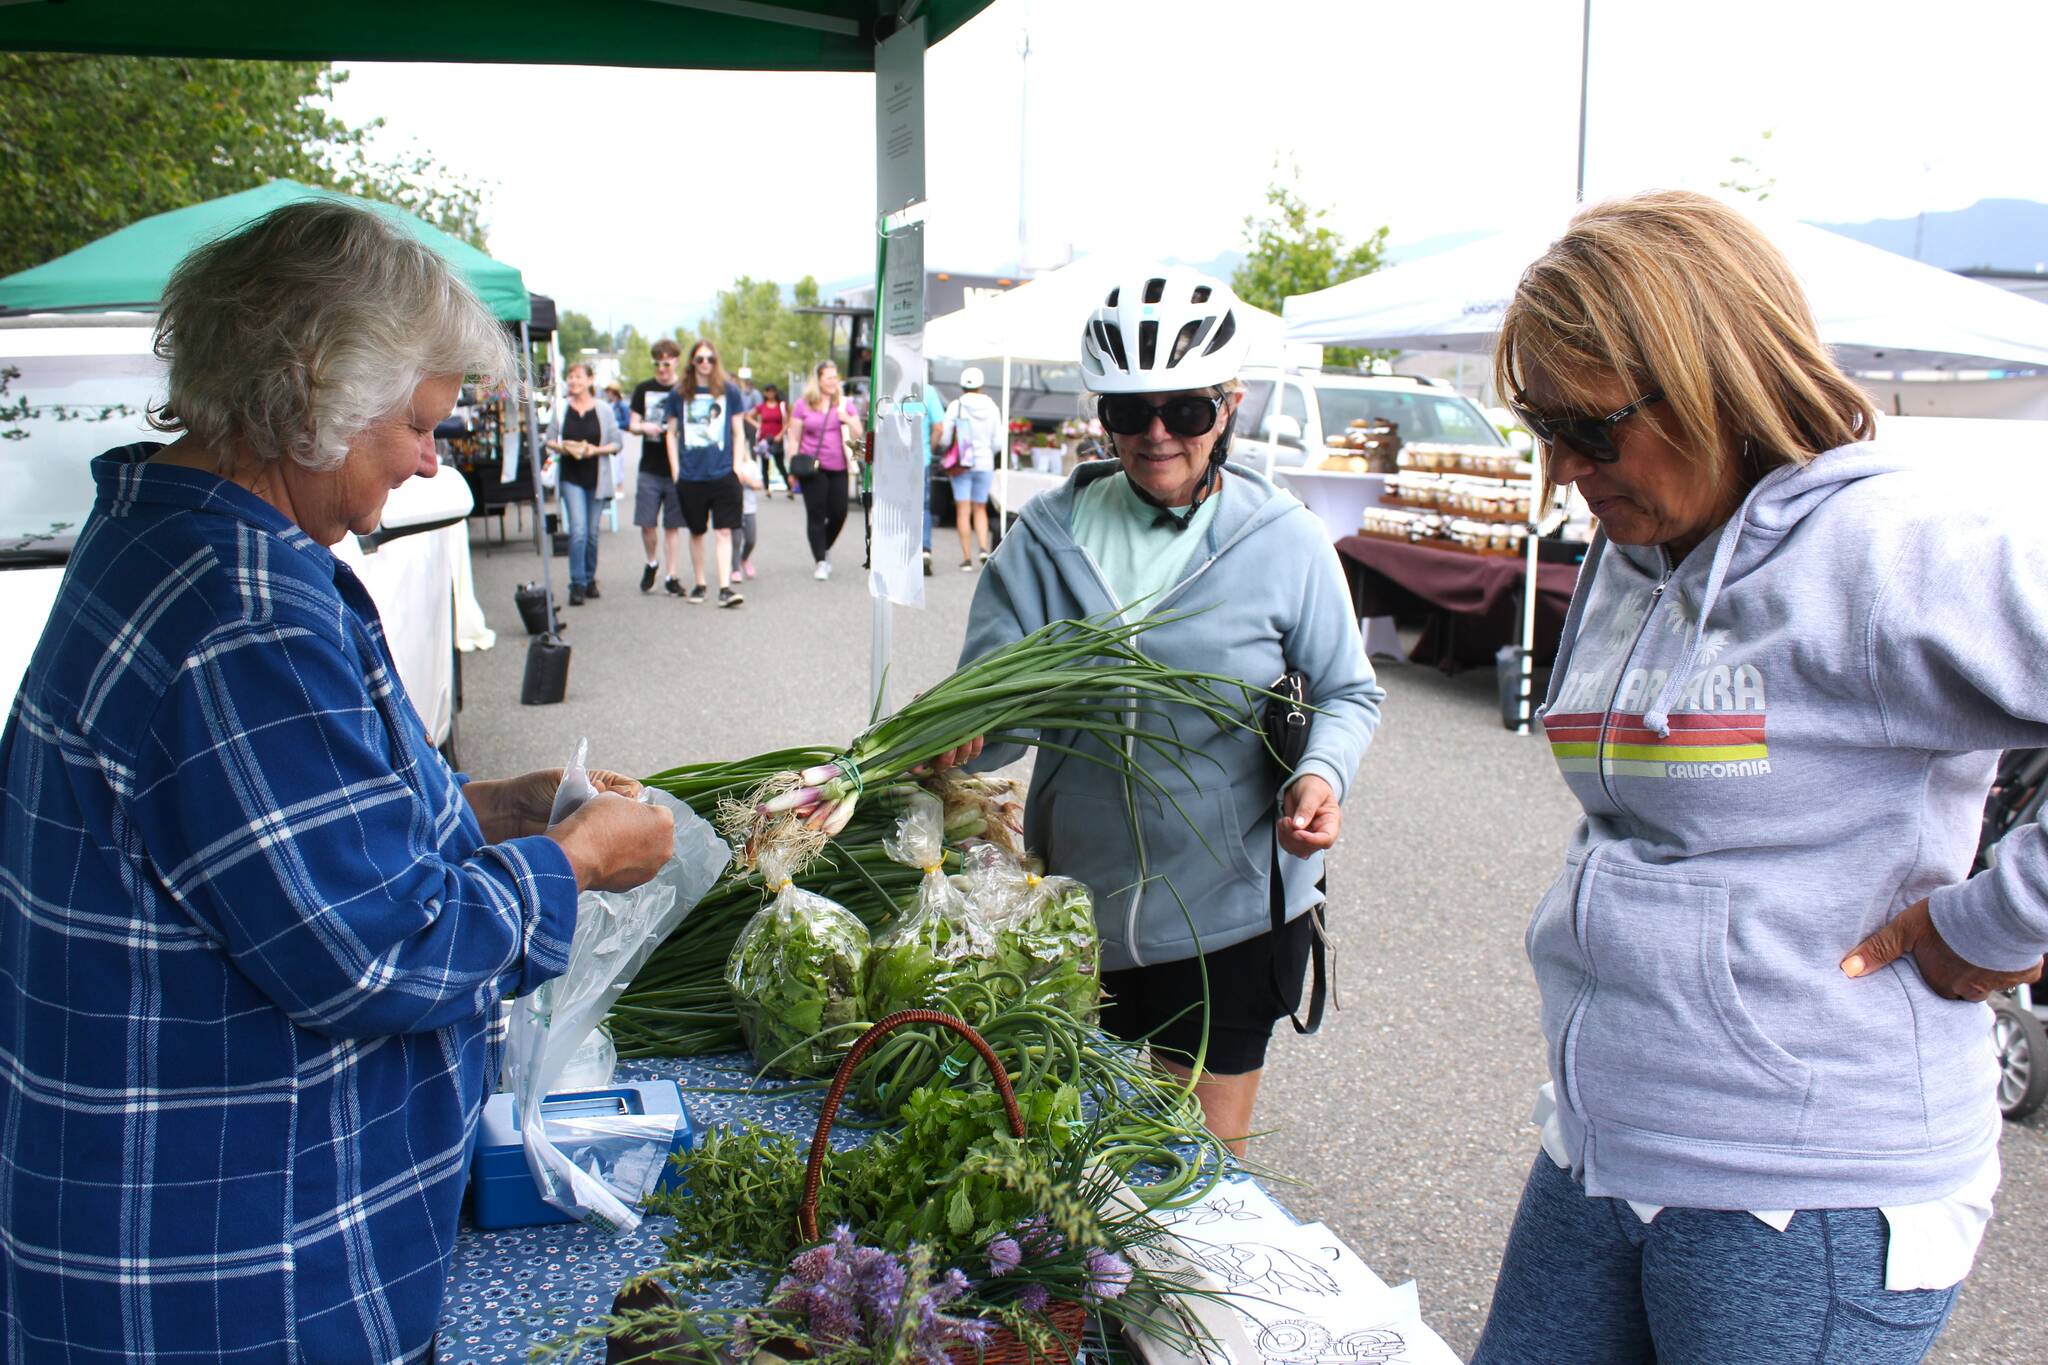 The annual Enumclaw Farmers Market on First Avenue runs every Thursday from 3 to 7 p.m. through September. To learn more, enumclawplateaufarmersmarket.org. (File photo)